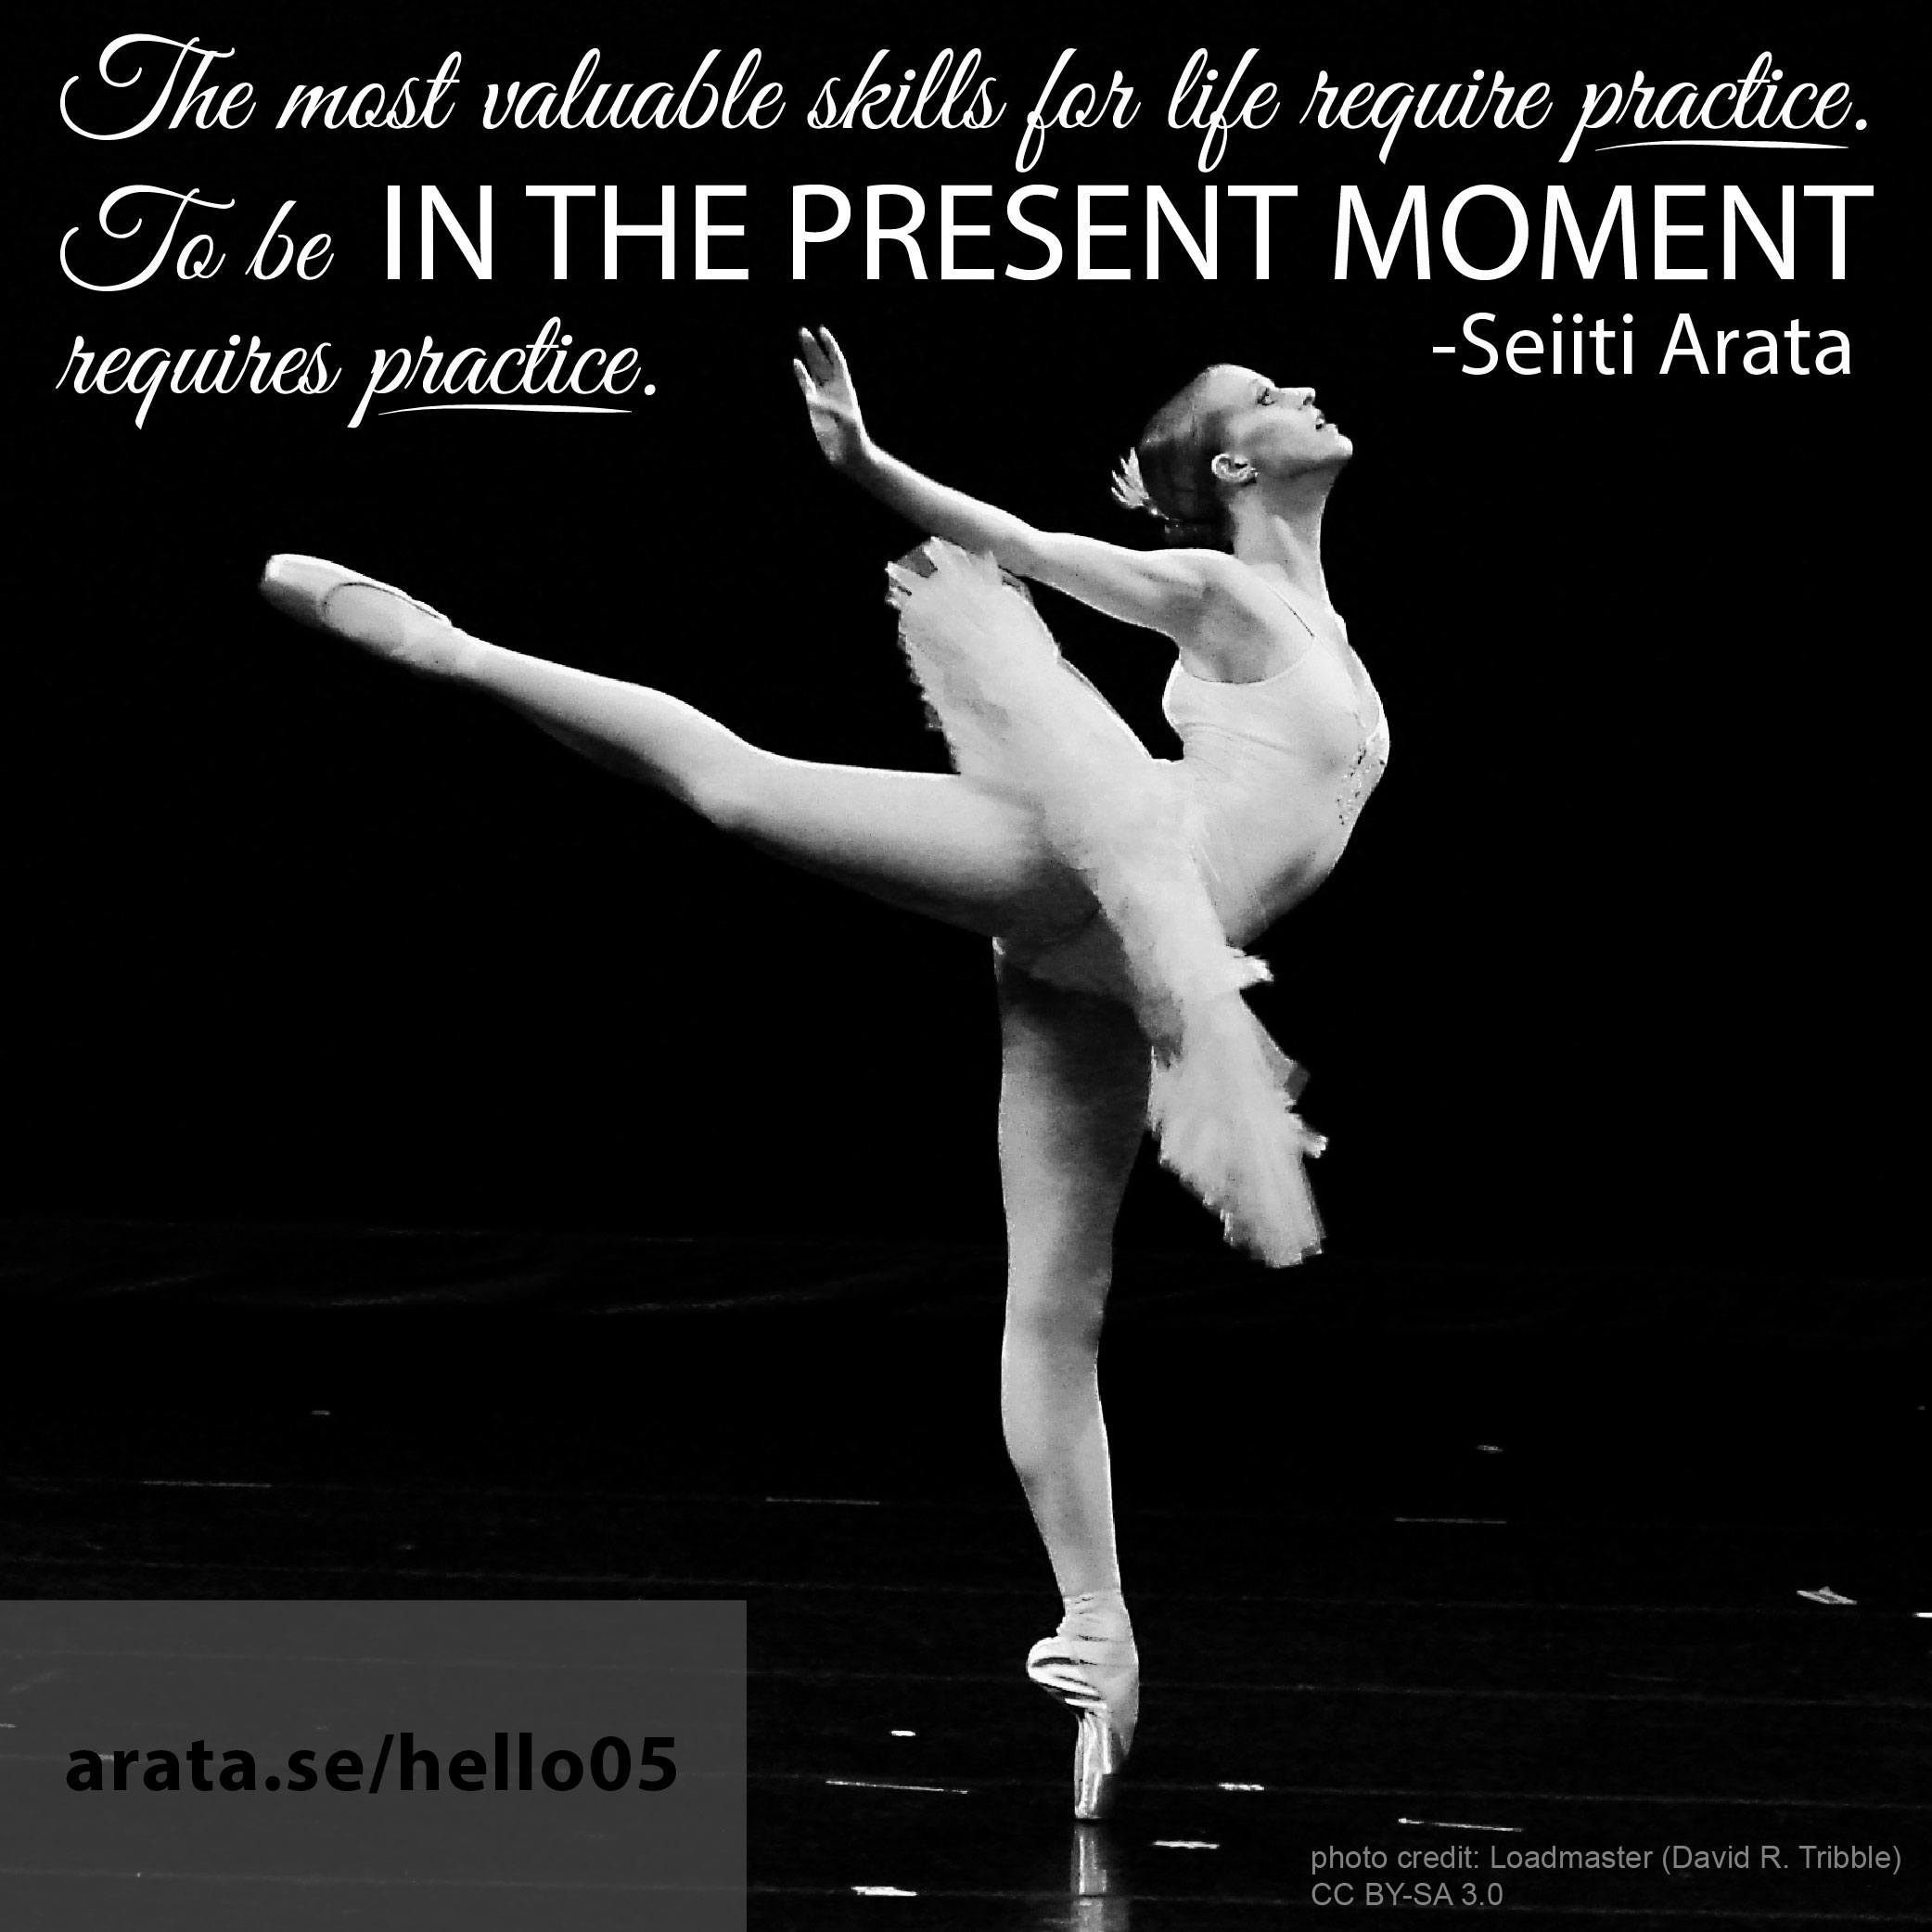 Be in the moment - The most valuable skills for life require practice. To be in the present moment requires practice.